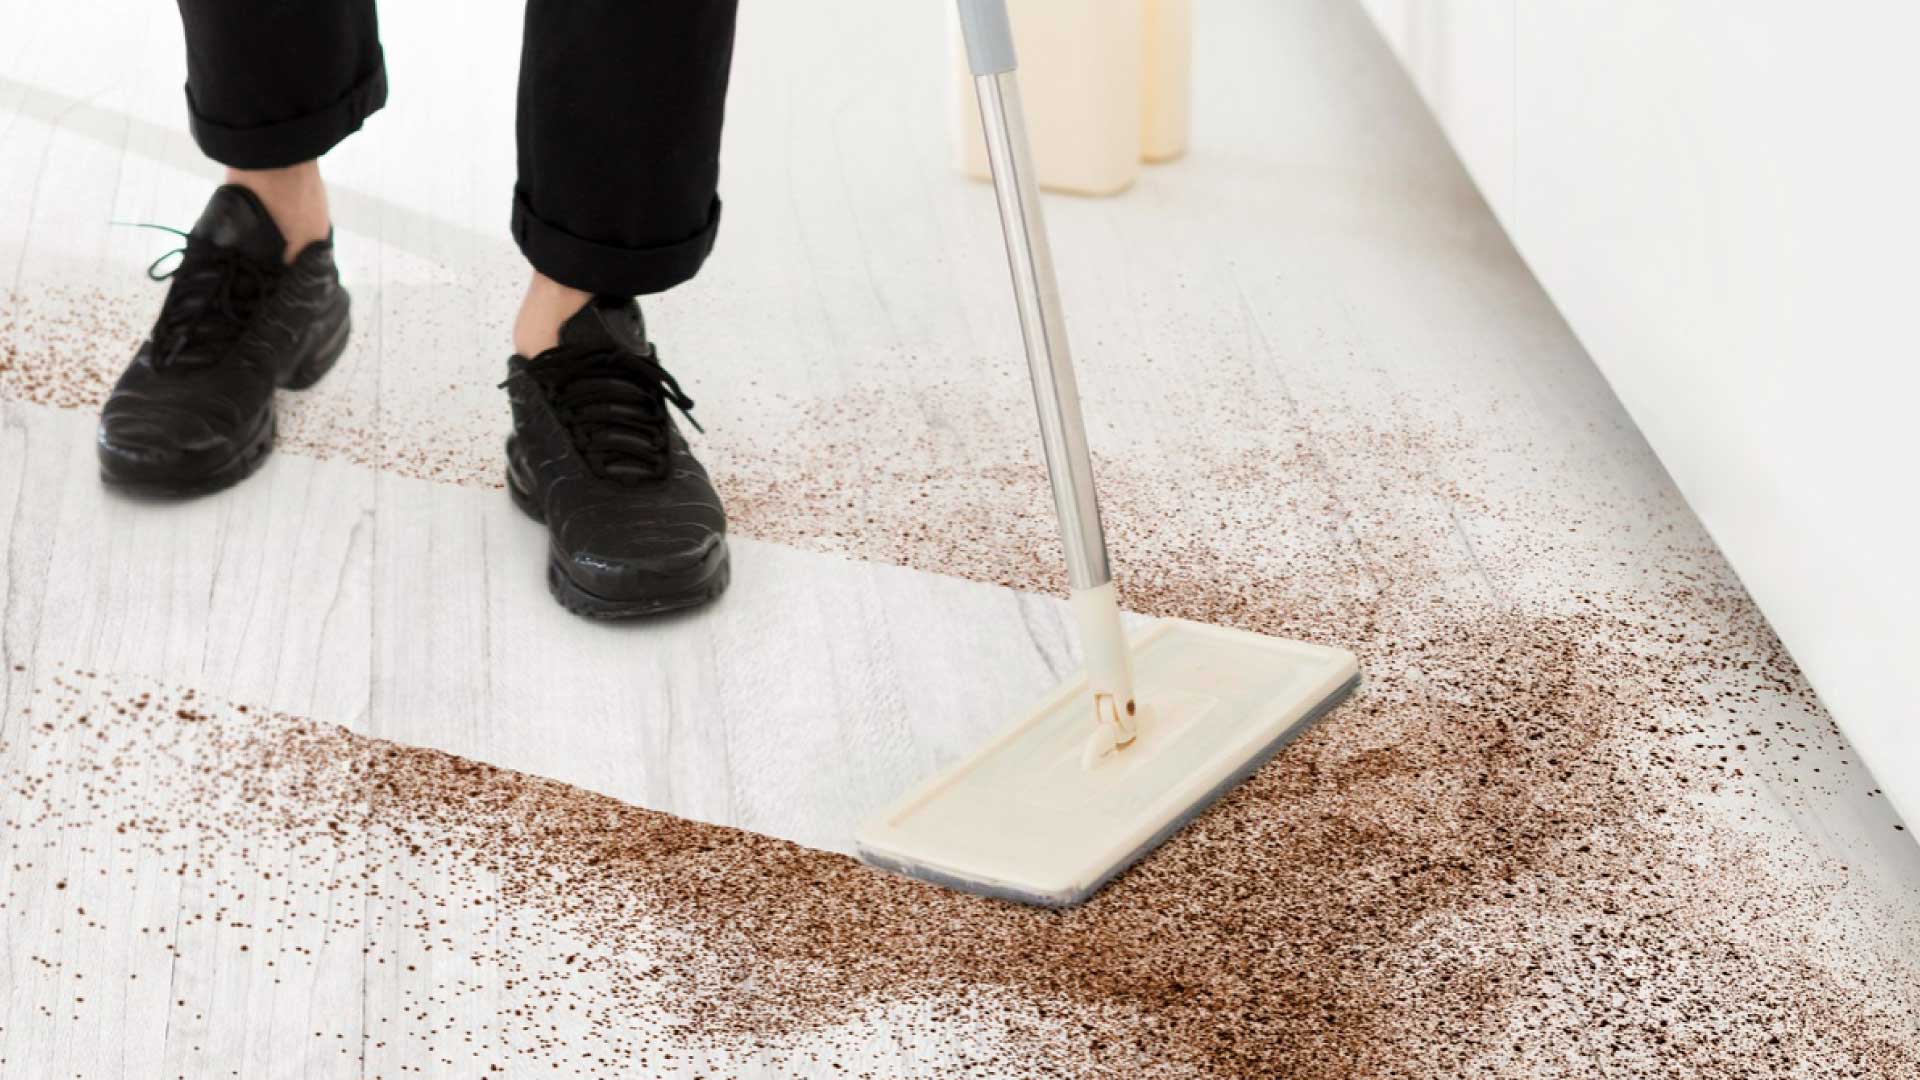 How To Clean And Maintain An Epoxy Floor: A Practical Guide